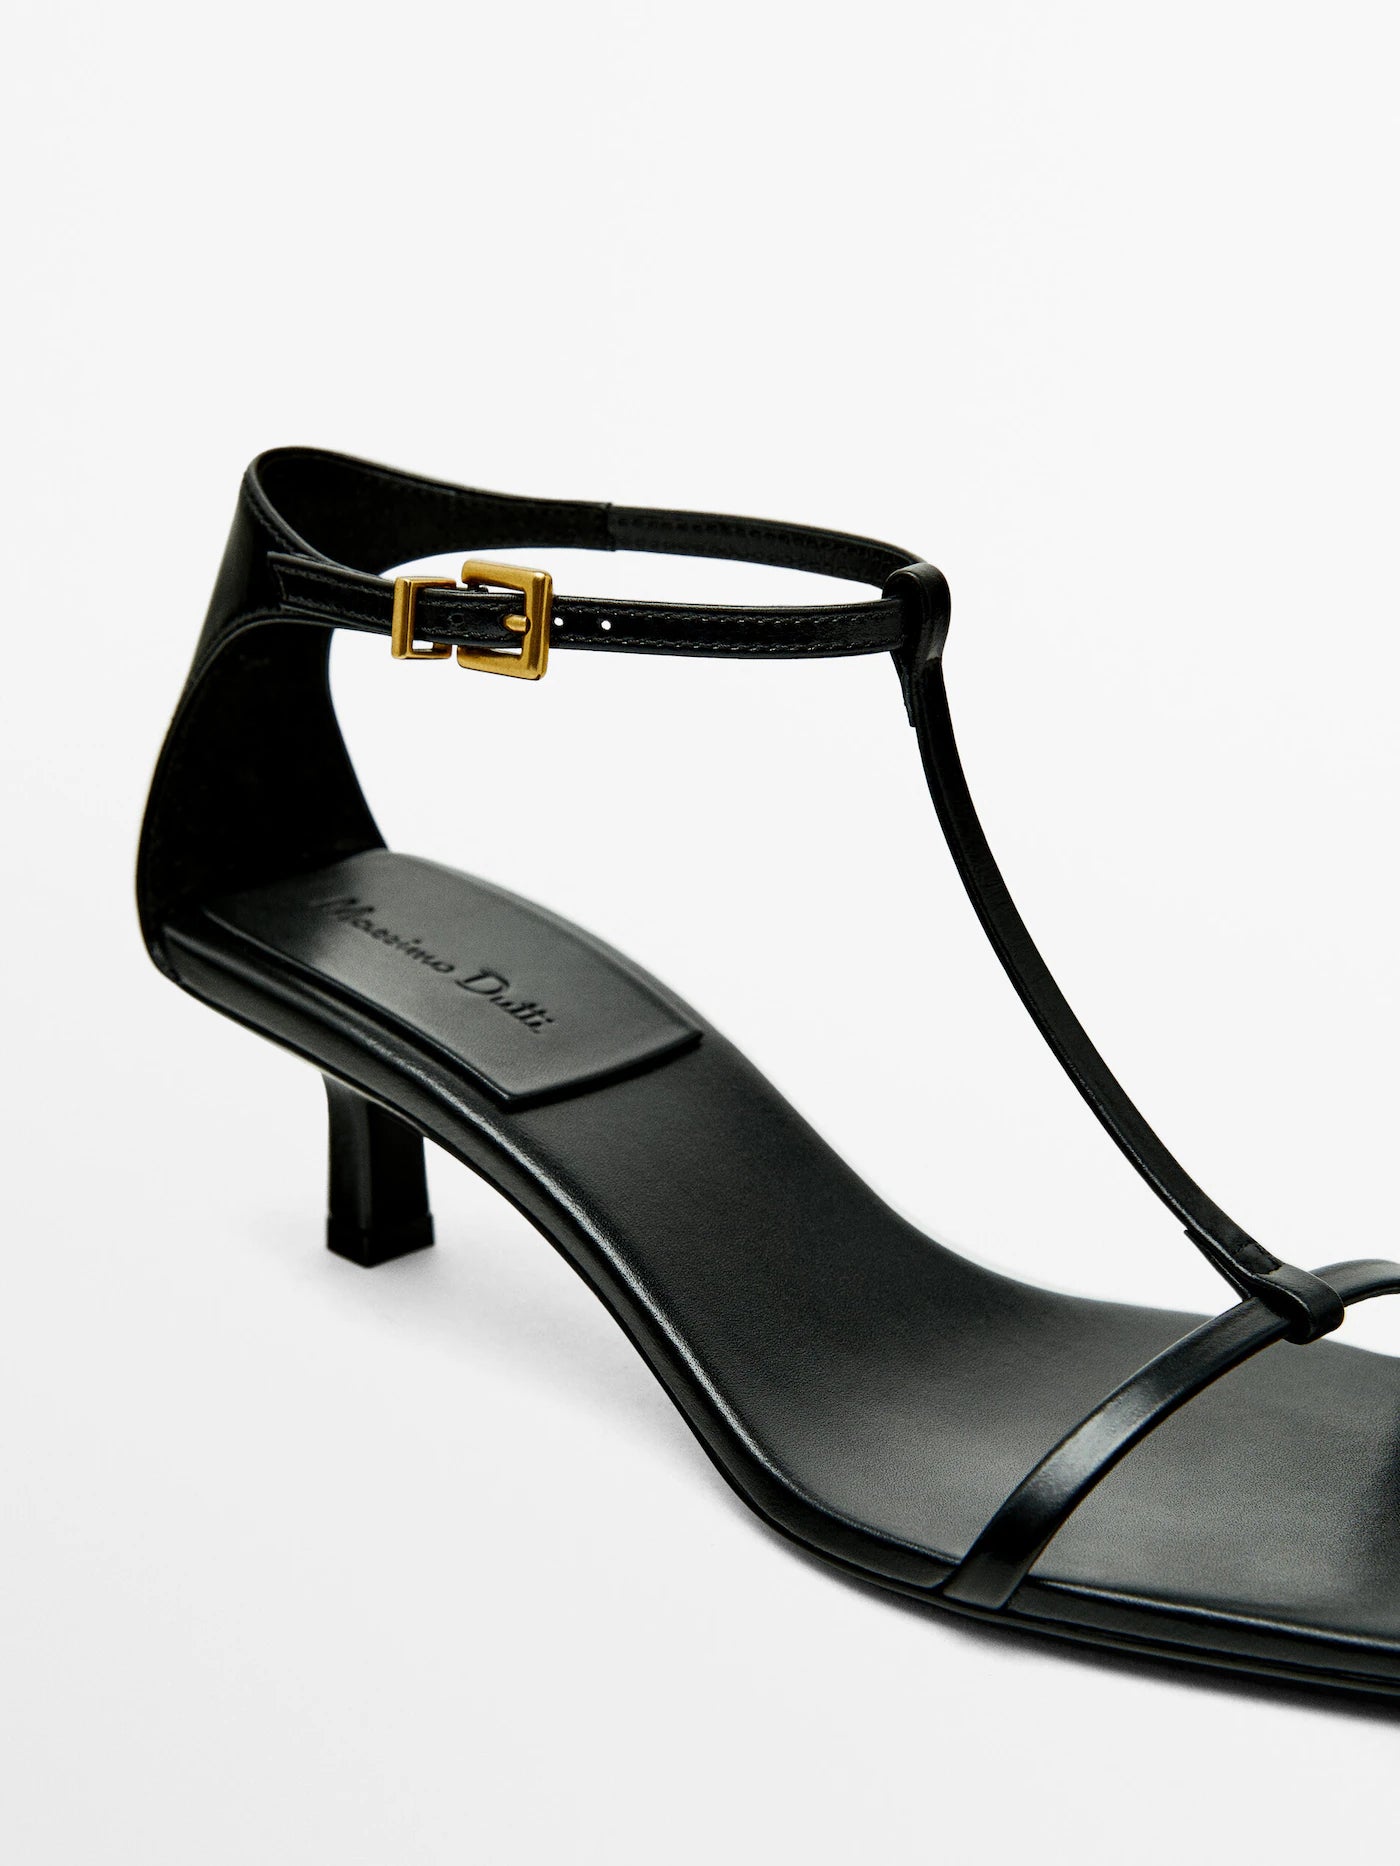 Strappy heeled sandals